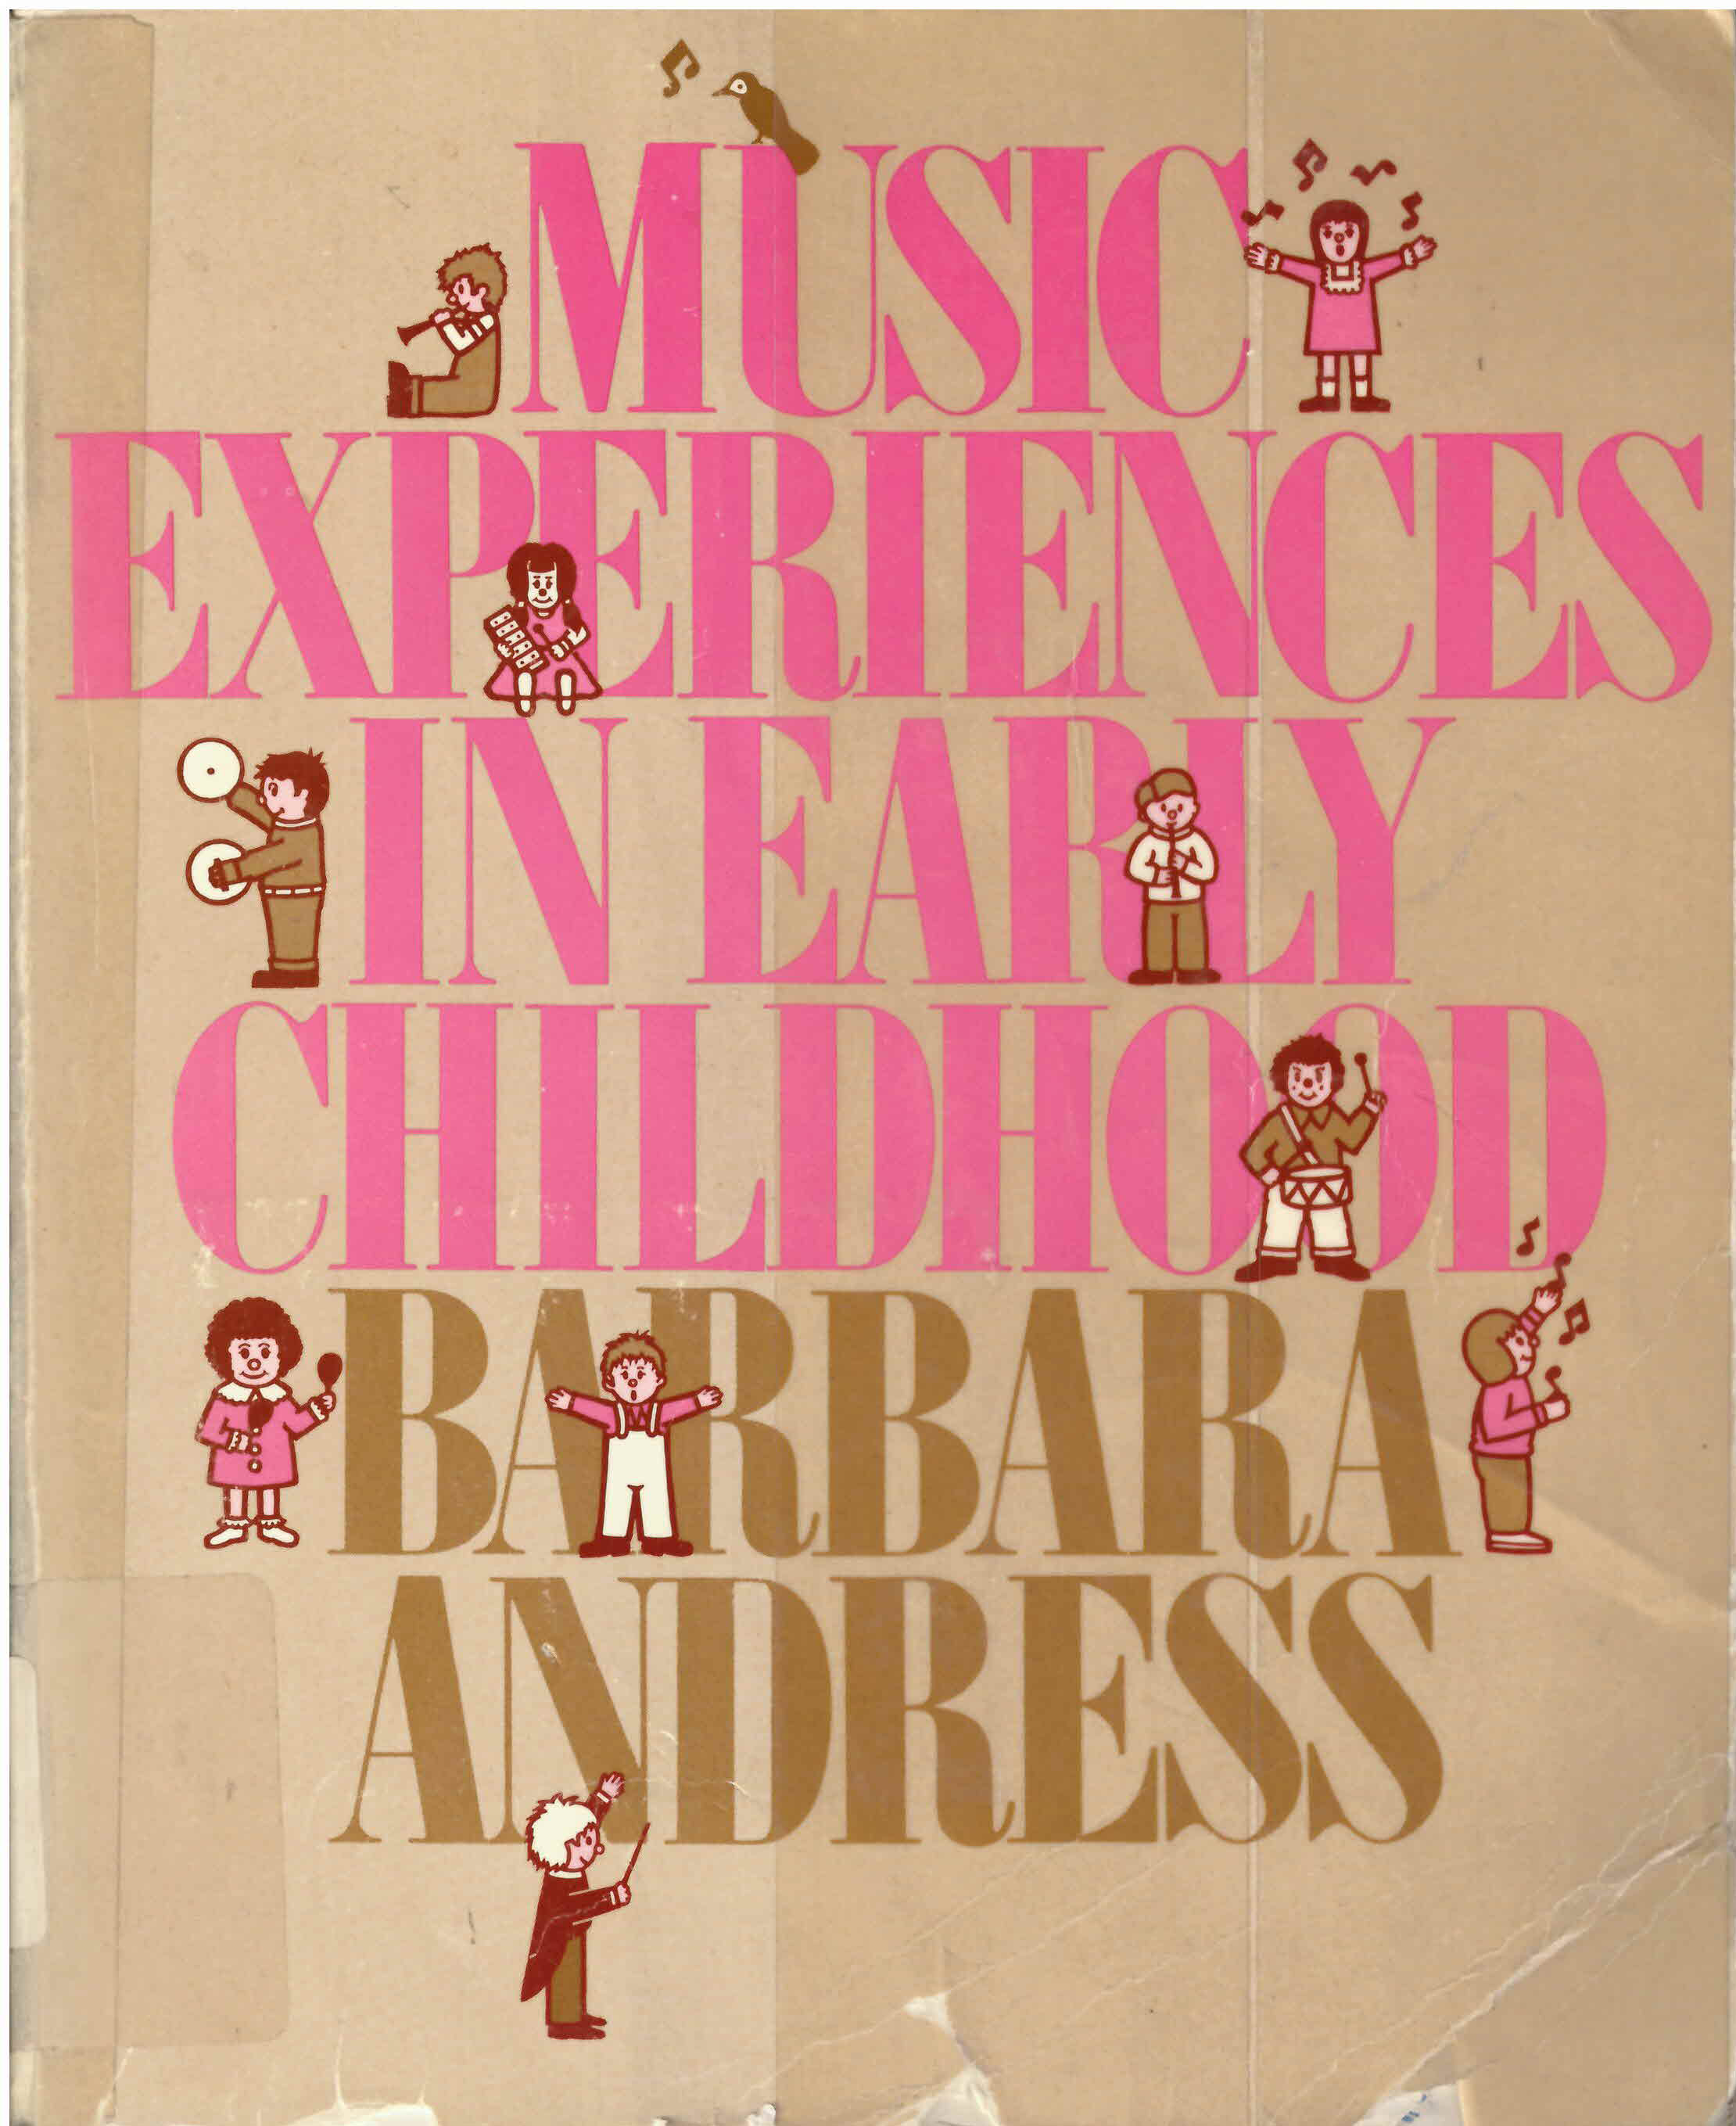 Music experiences in early childhood